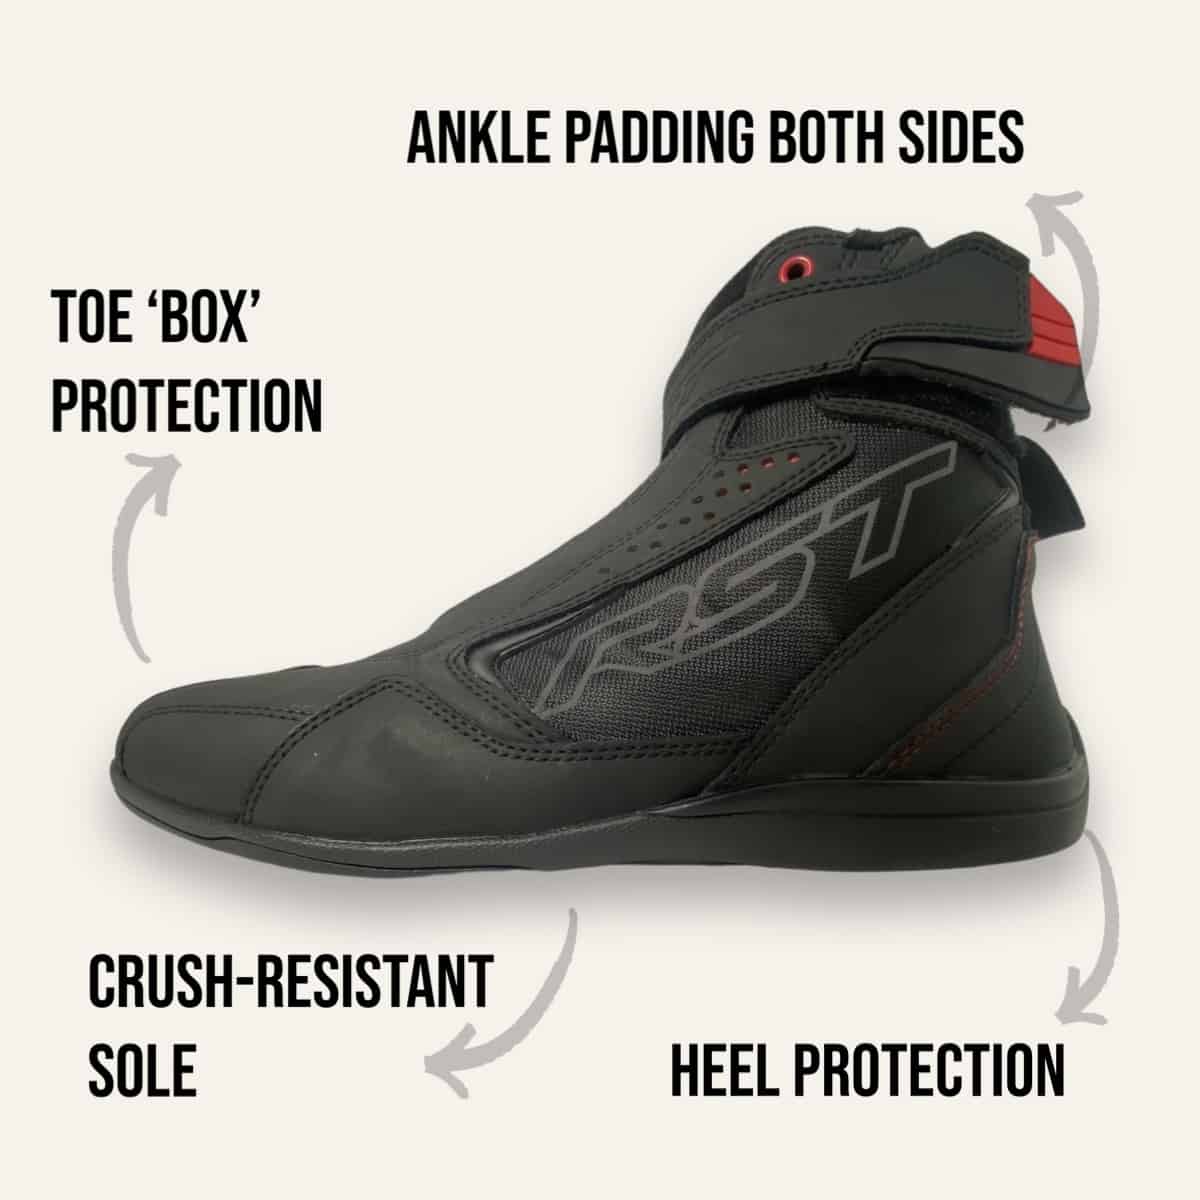 RST Frontier CE Boots: Breathable summer motorcycle boots - protection